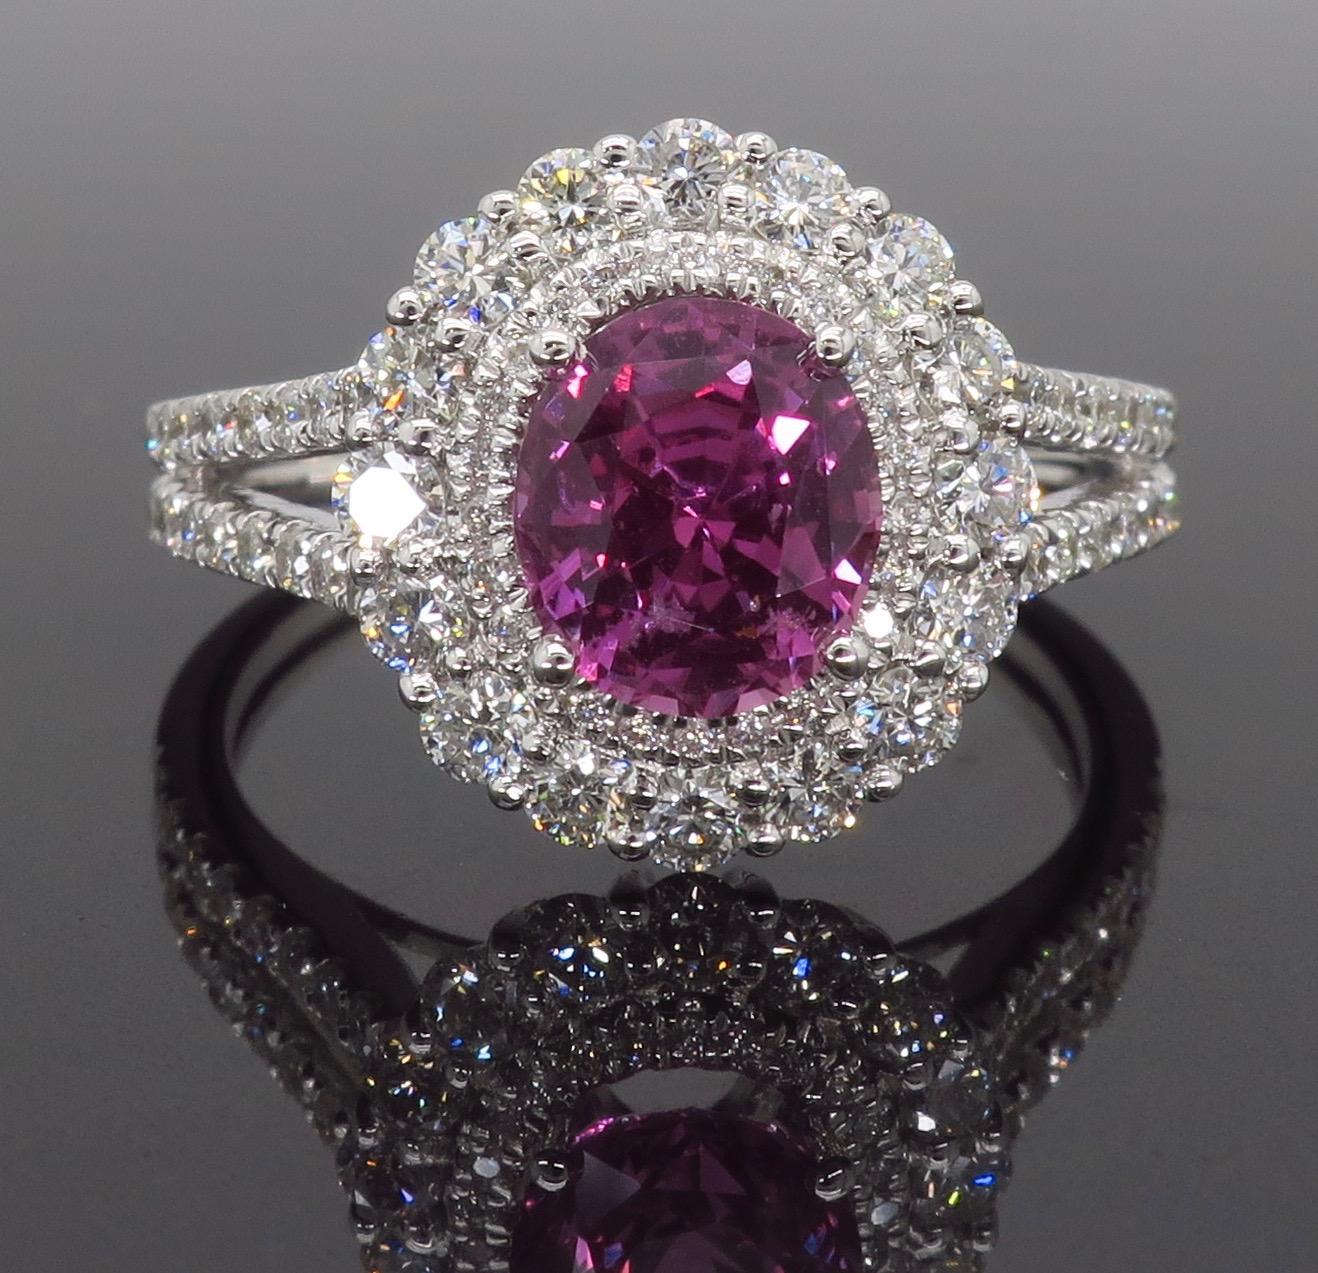 Oval Cut Pink Sapphire and Diamond Ring